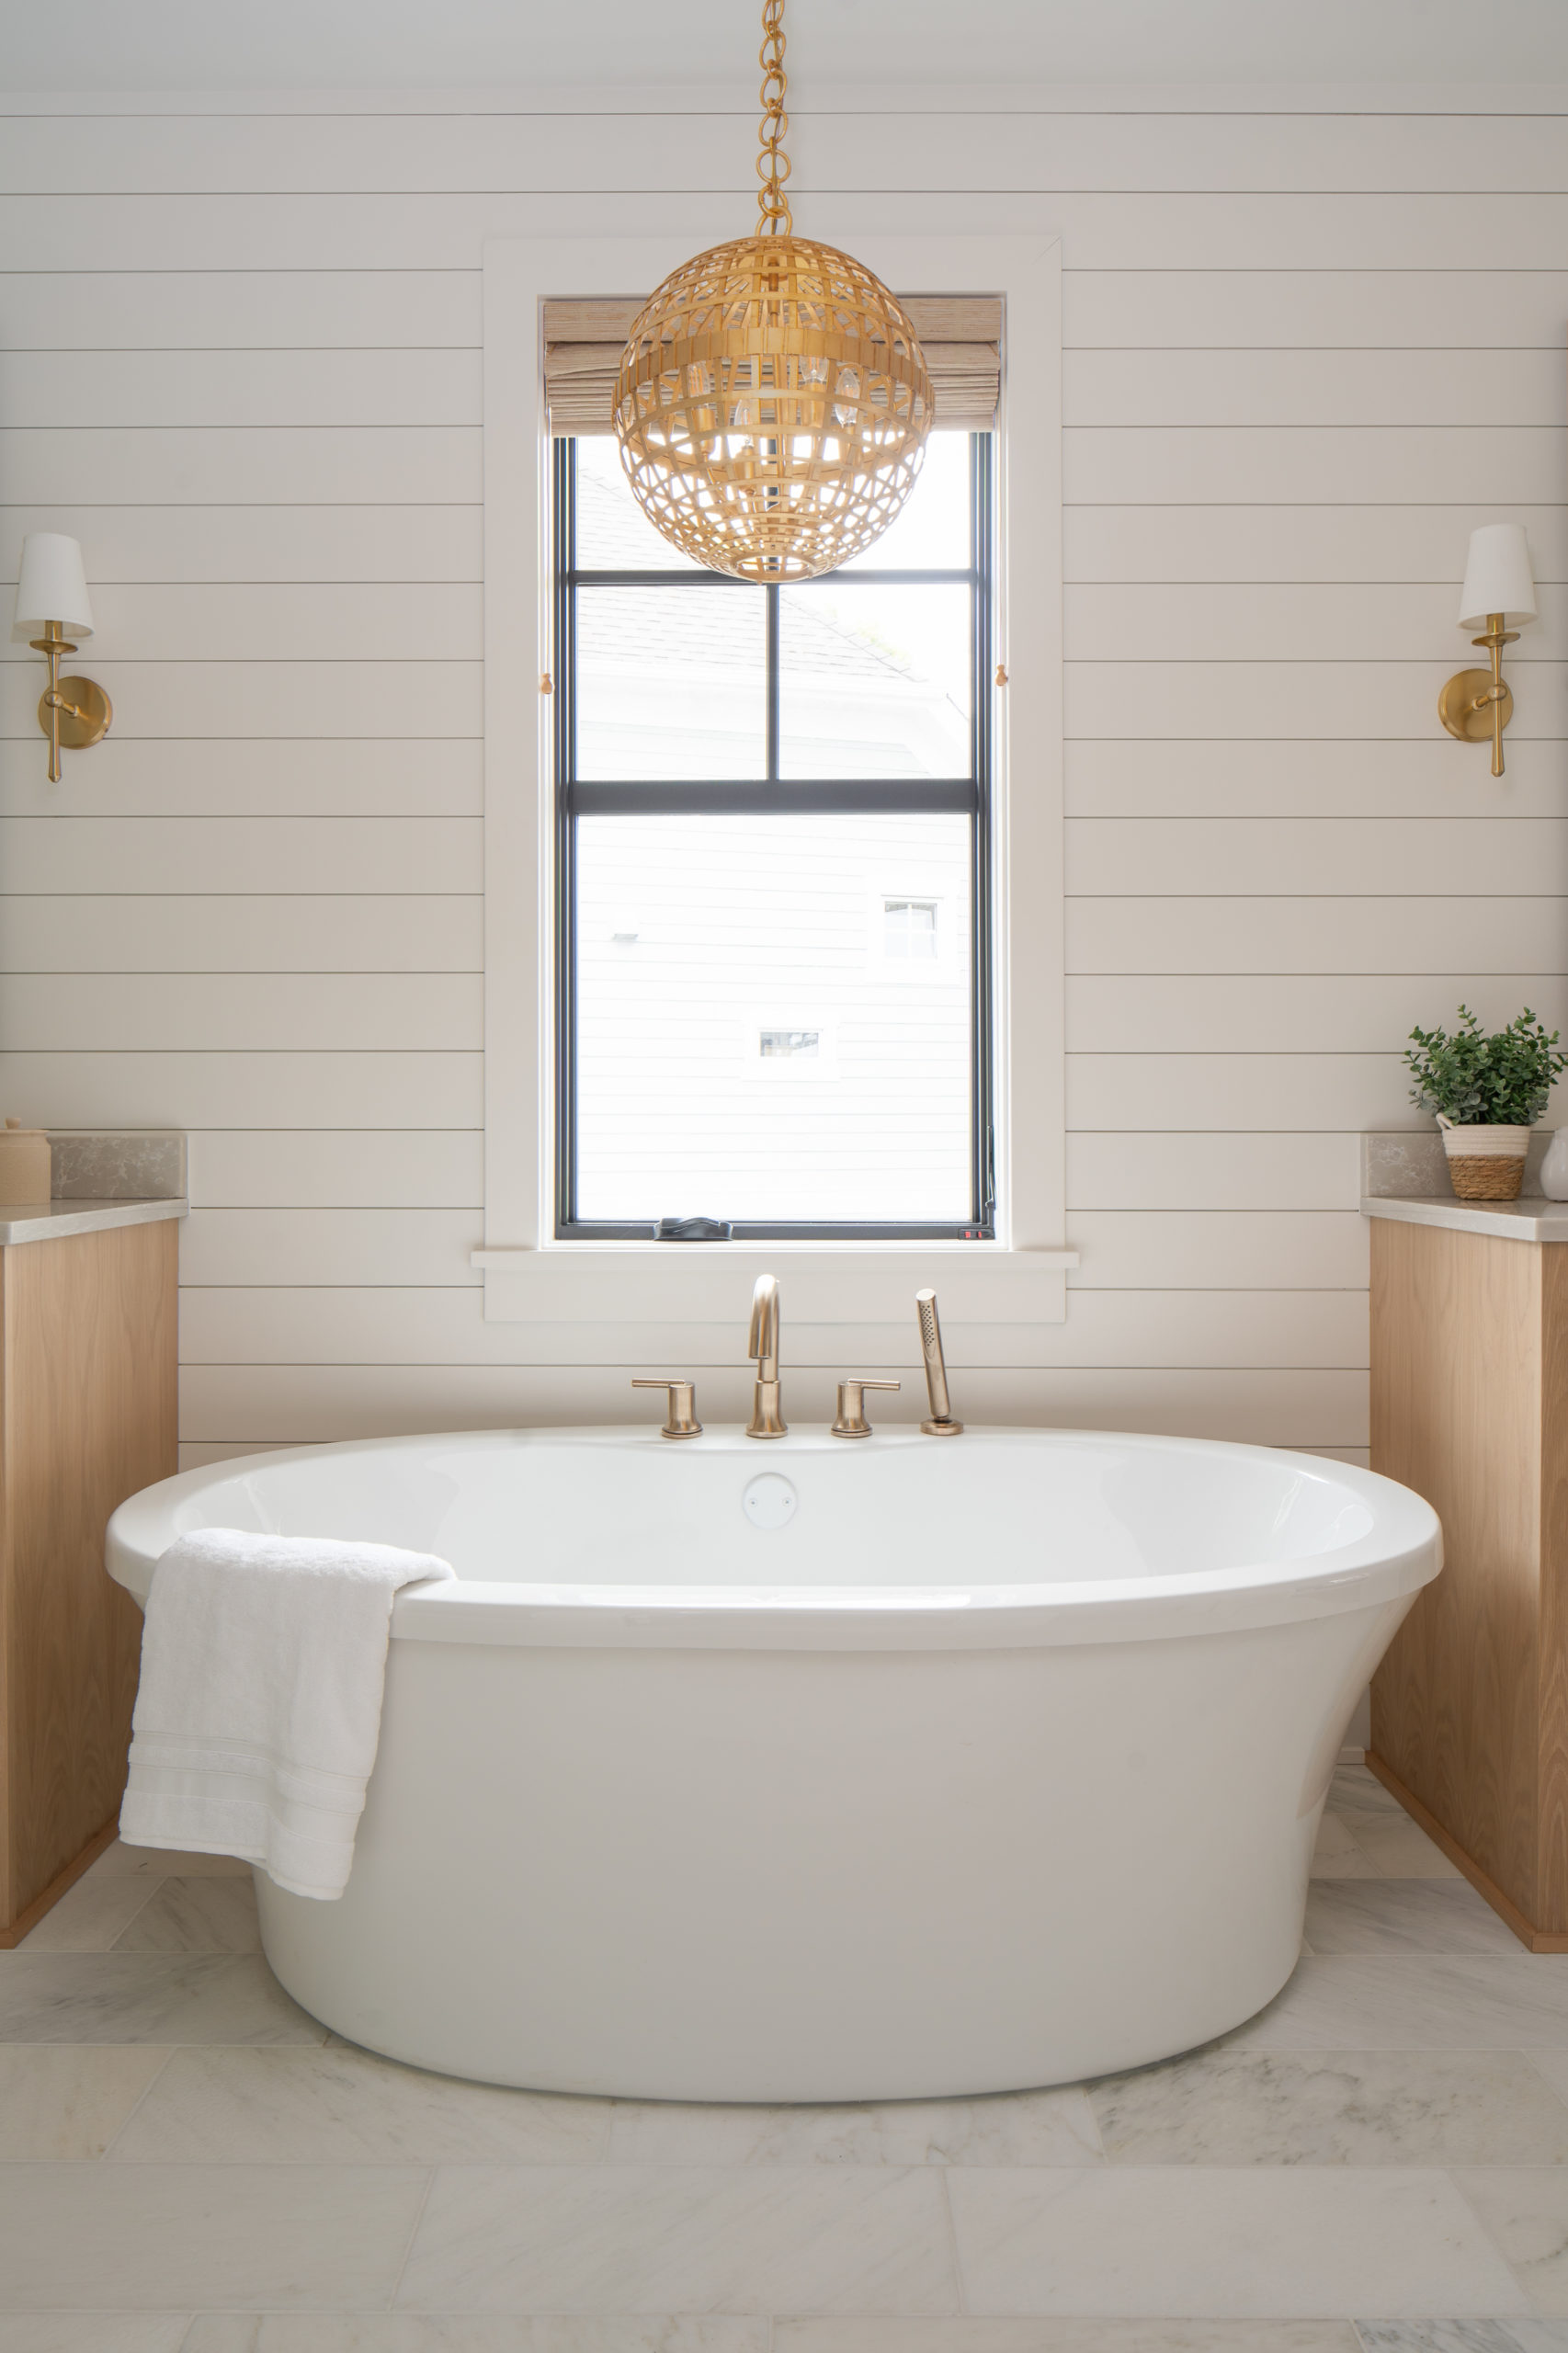 A white bathroom with a large tub and a chandelier.